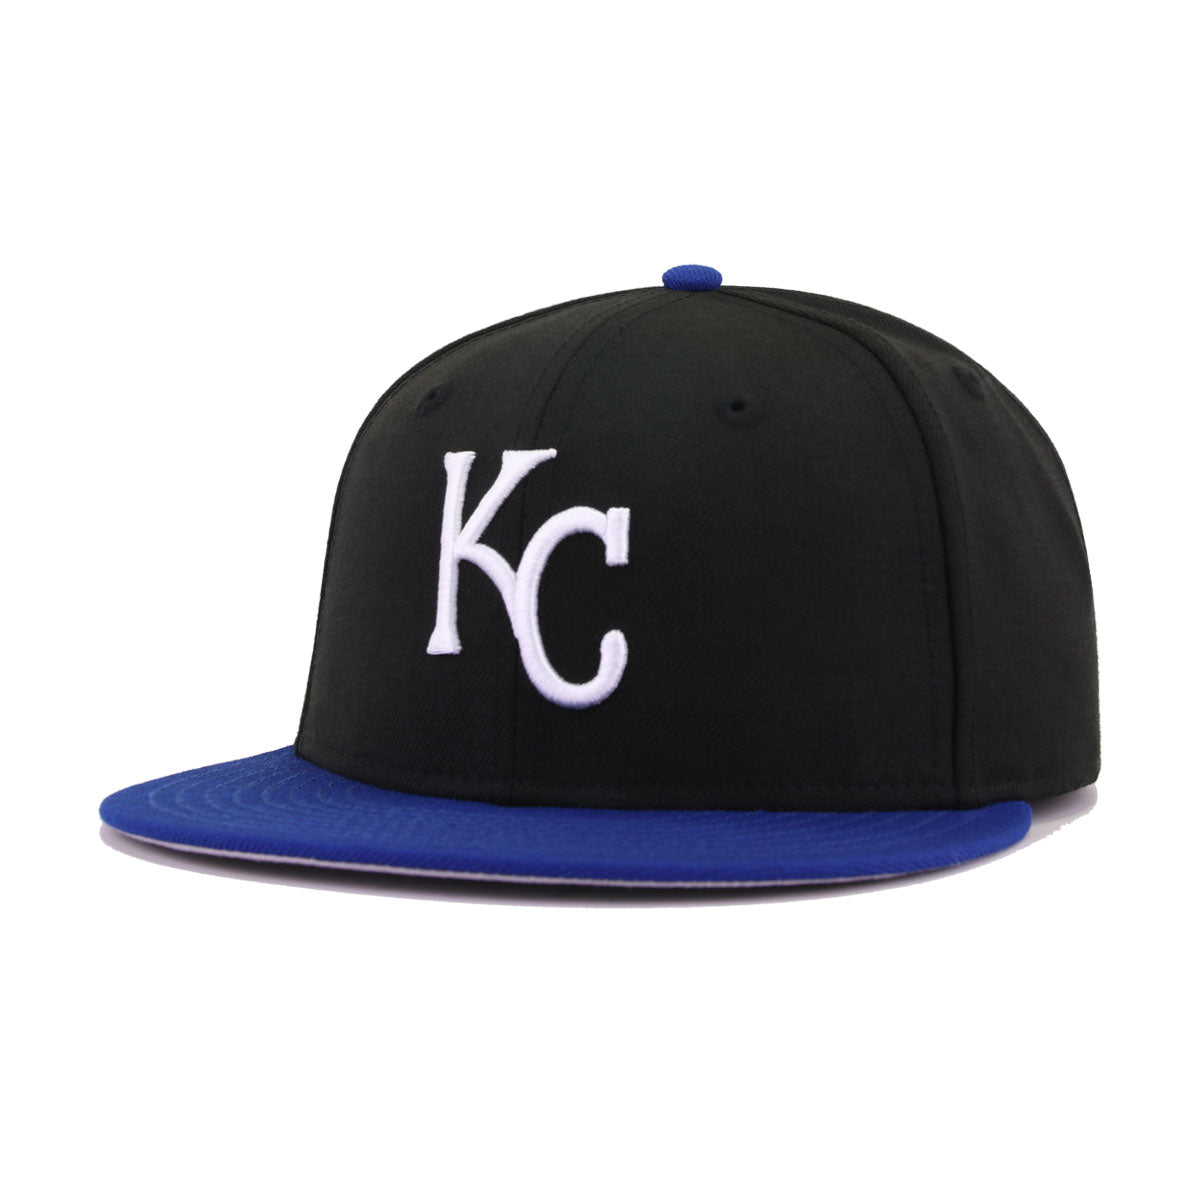 Kansas City Embroidered Hat - Bright Blue